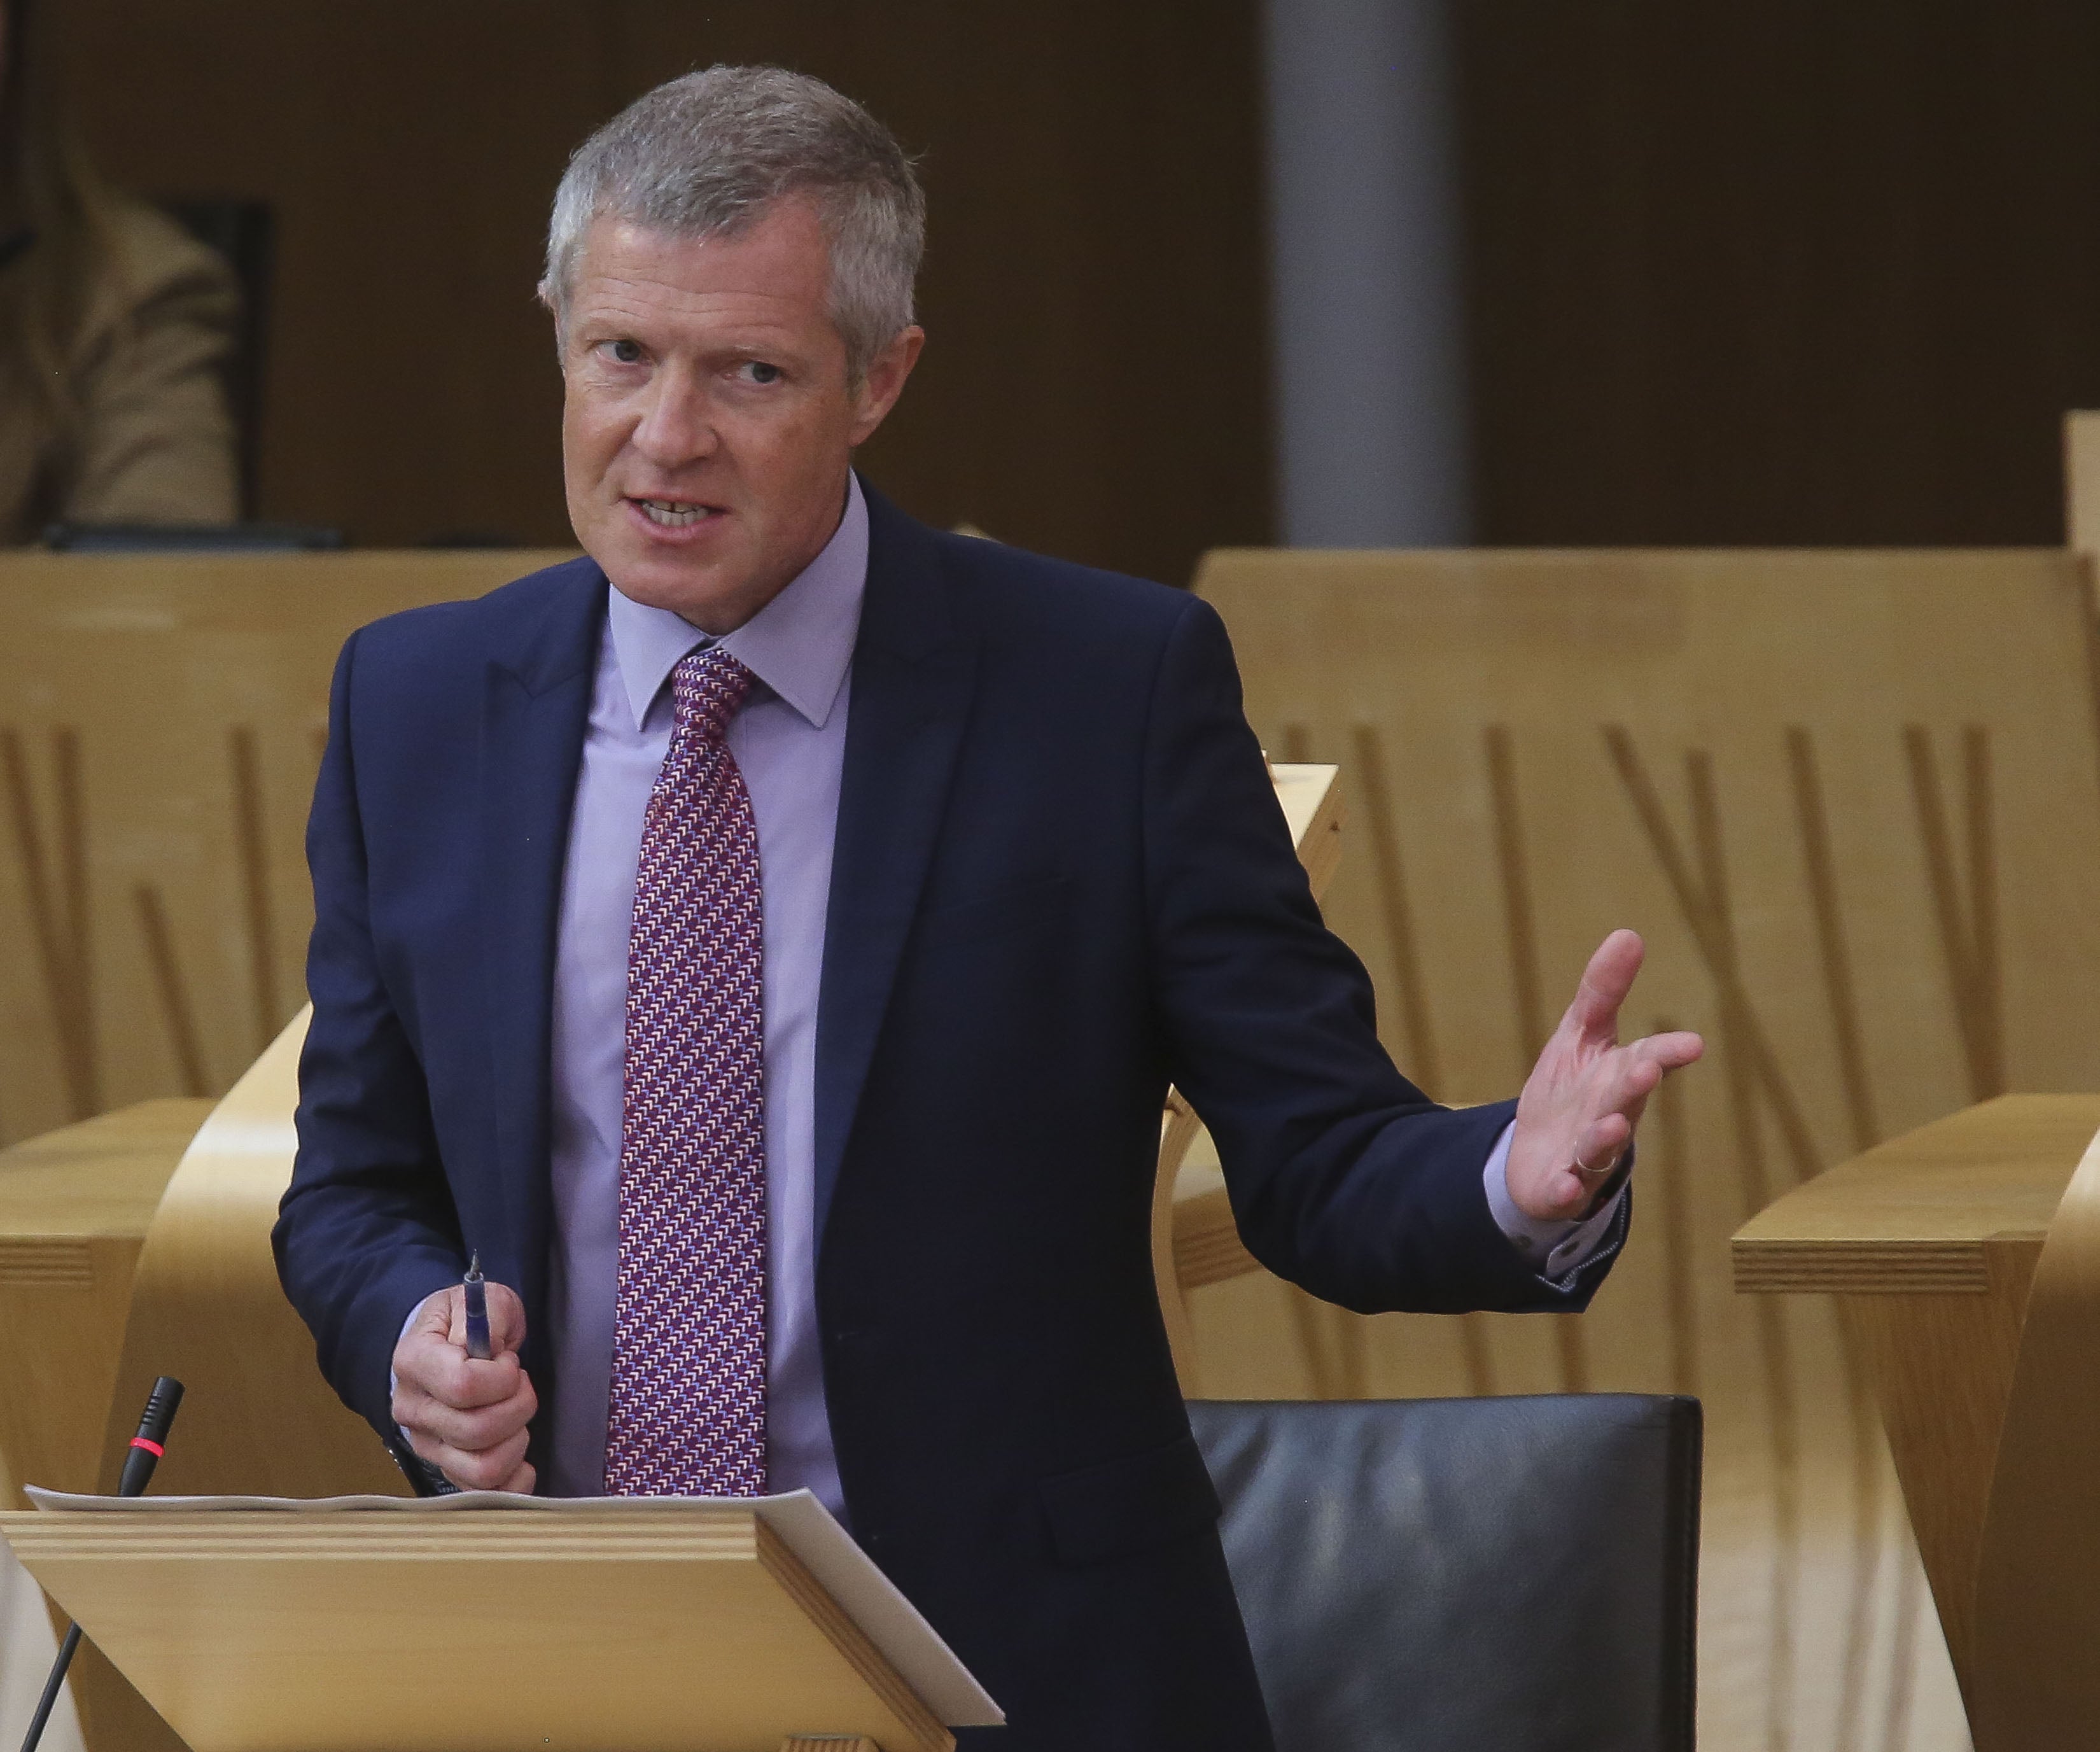 Willie Rennie said public confidence in data used to back-up restrictions ‘must not be put at risk’ (Fraser Bremner/Scottish Daily Mail/PA)